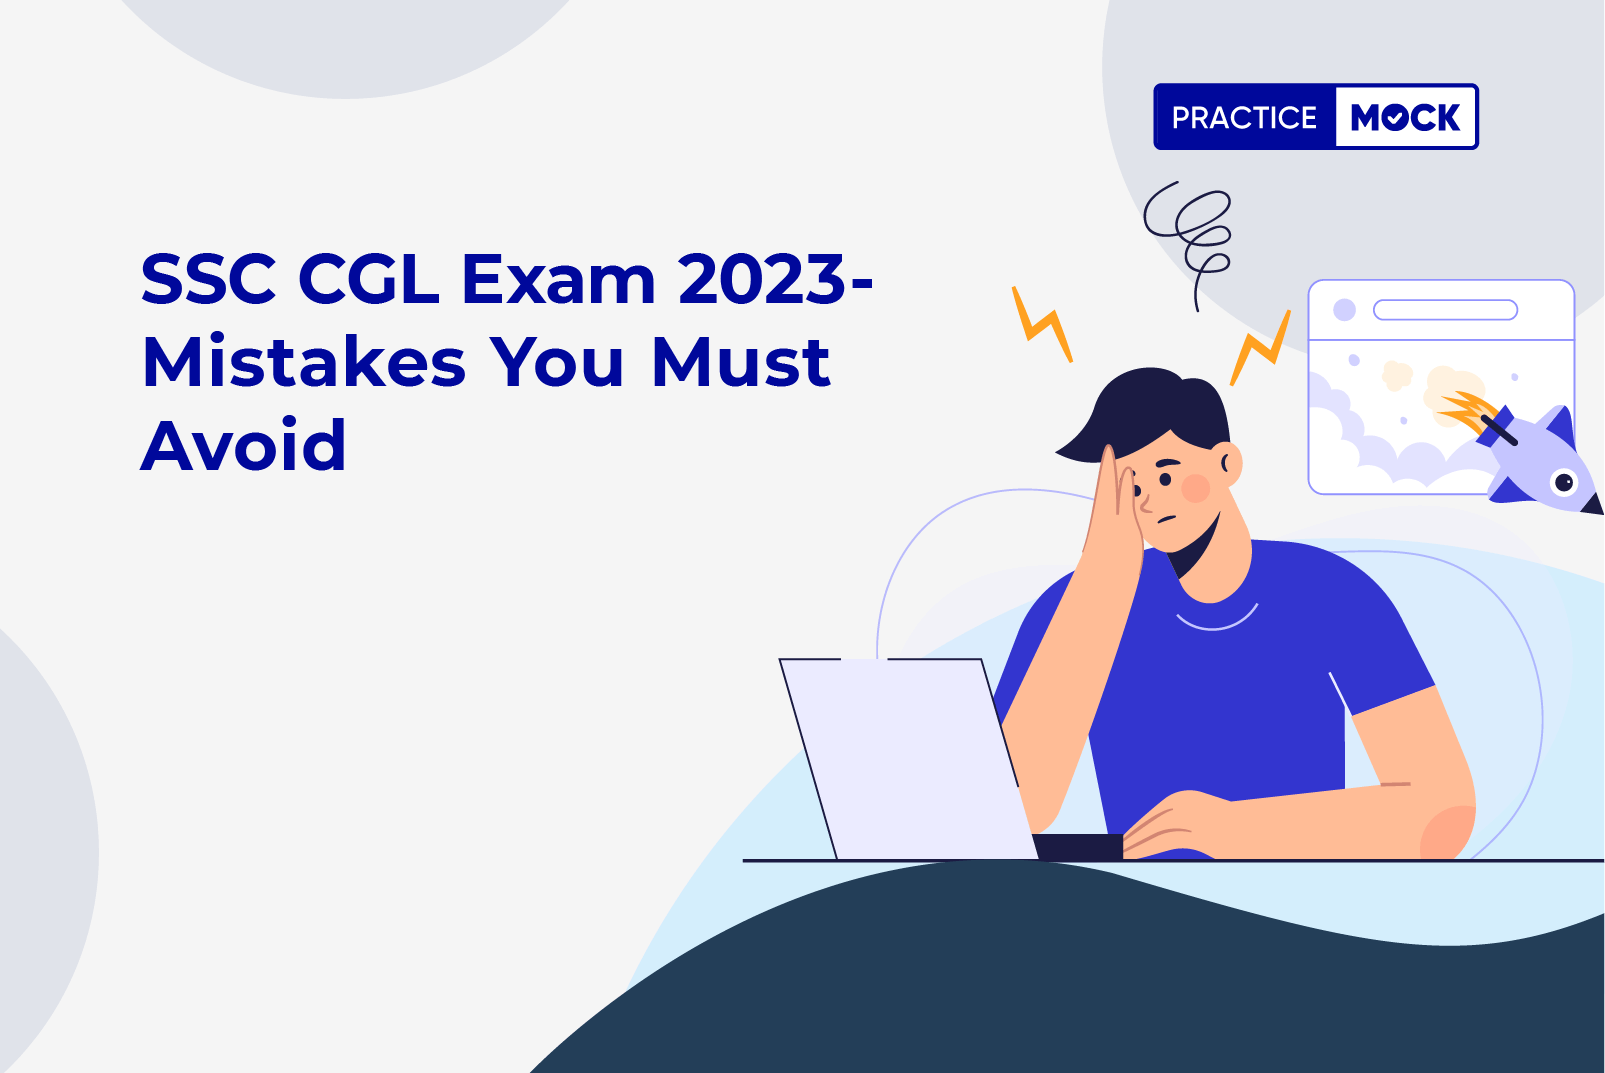 SSC CGL Exam 2023 - Mistakes You Must Avoid